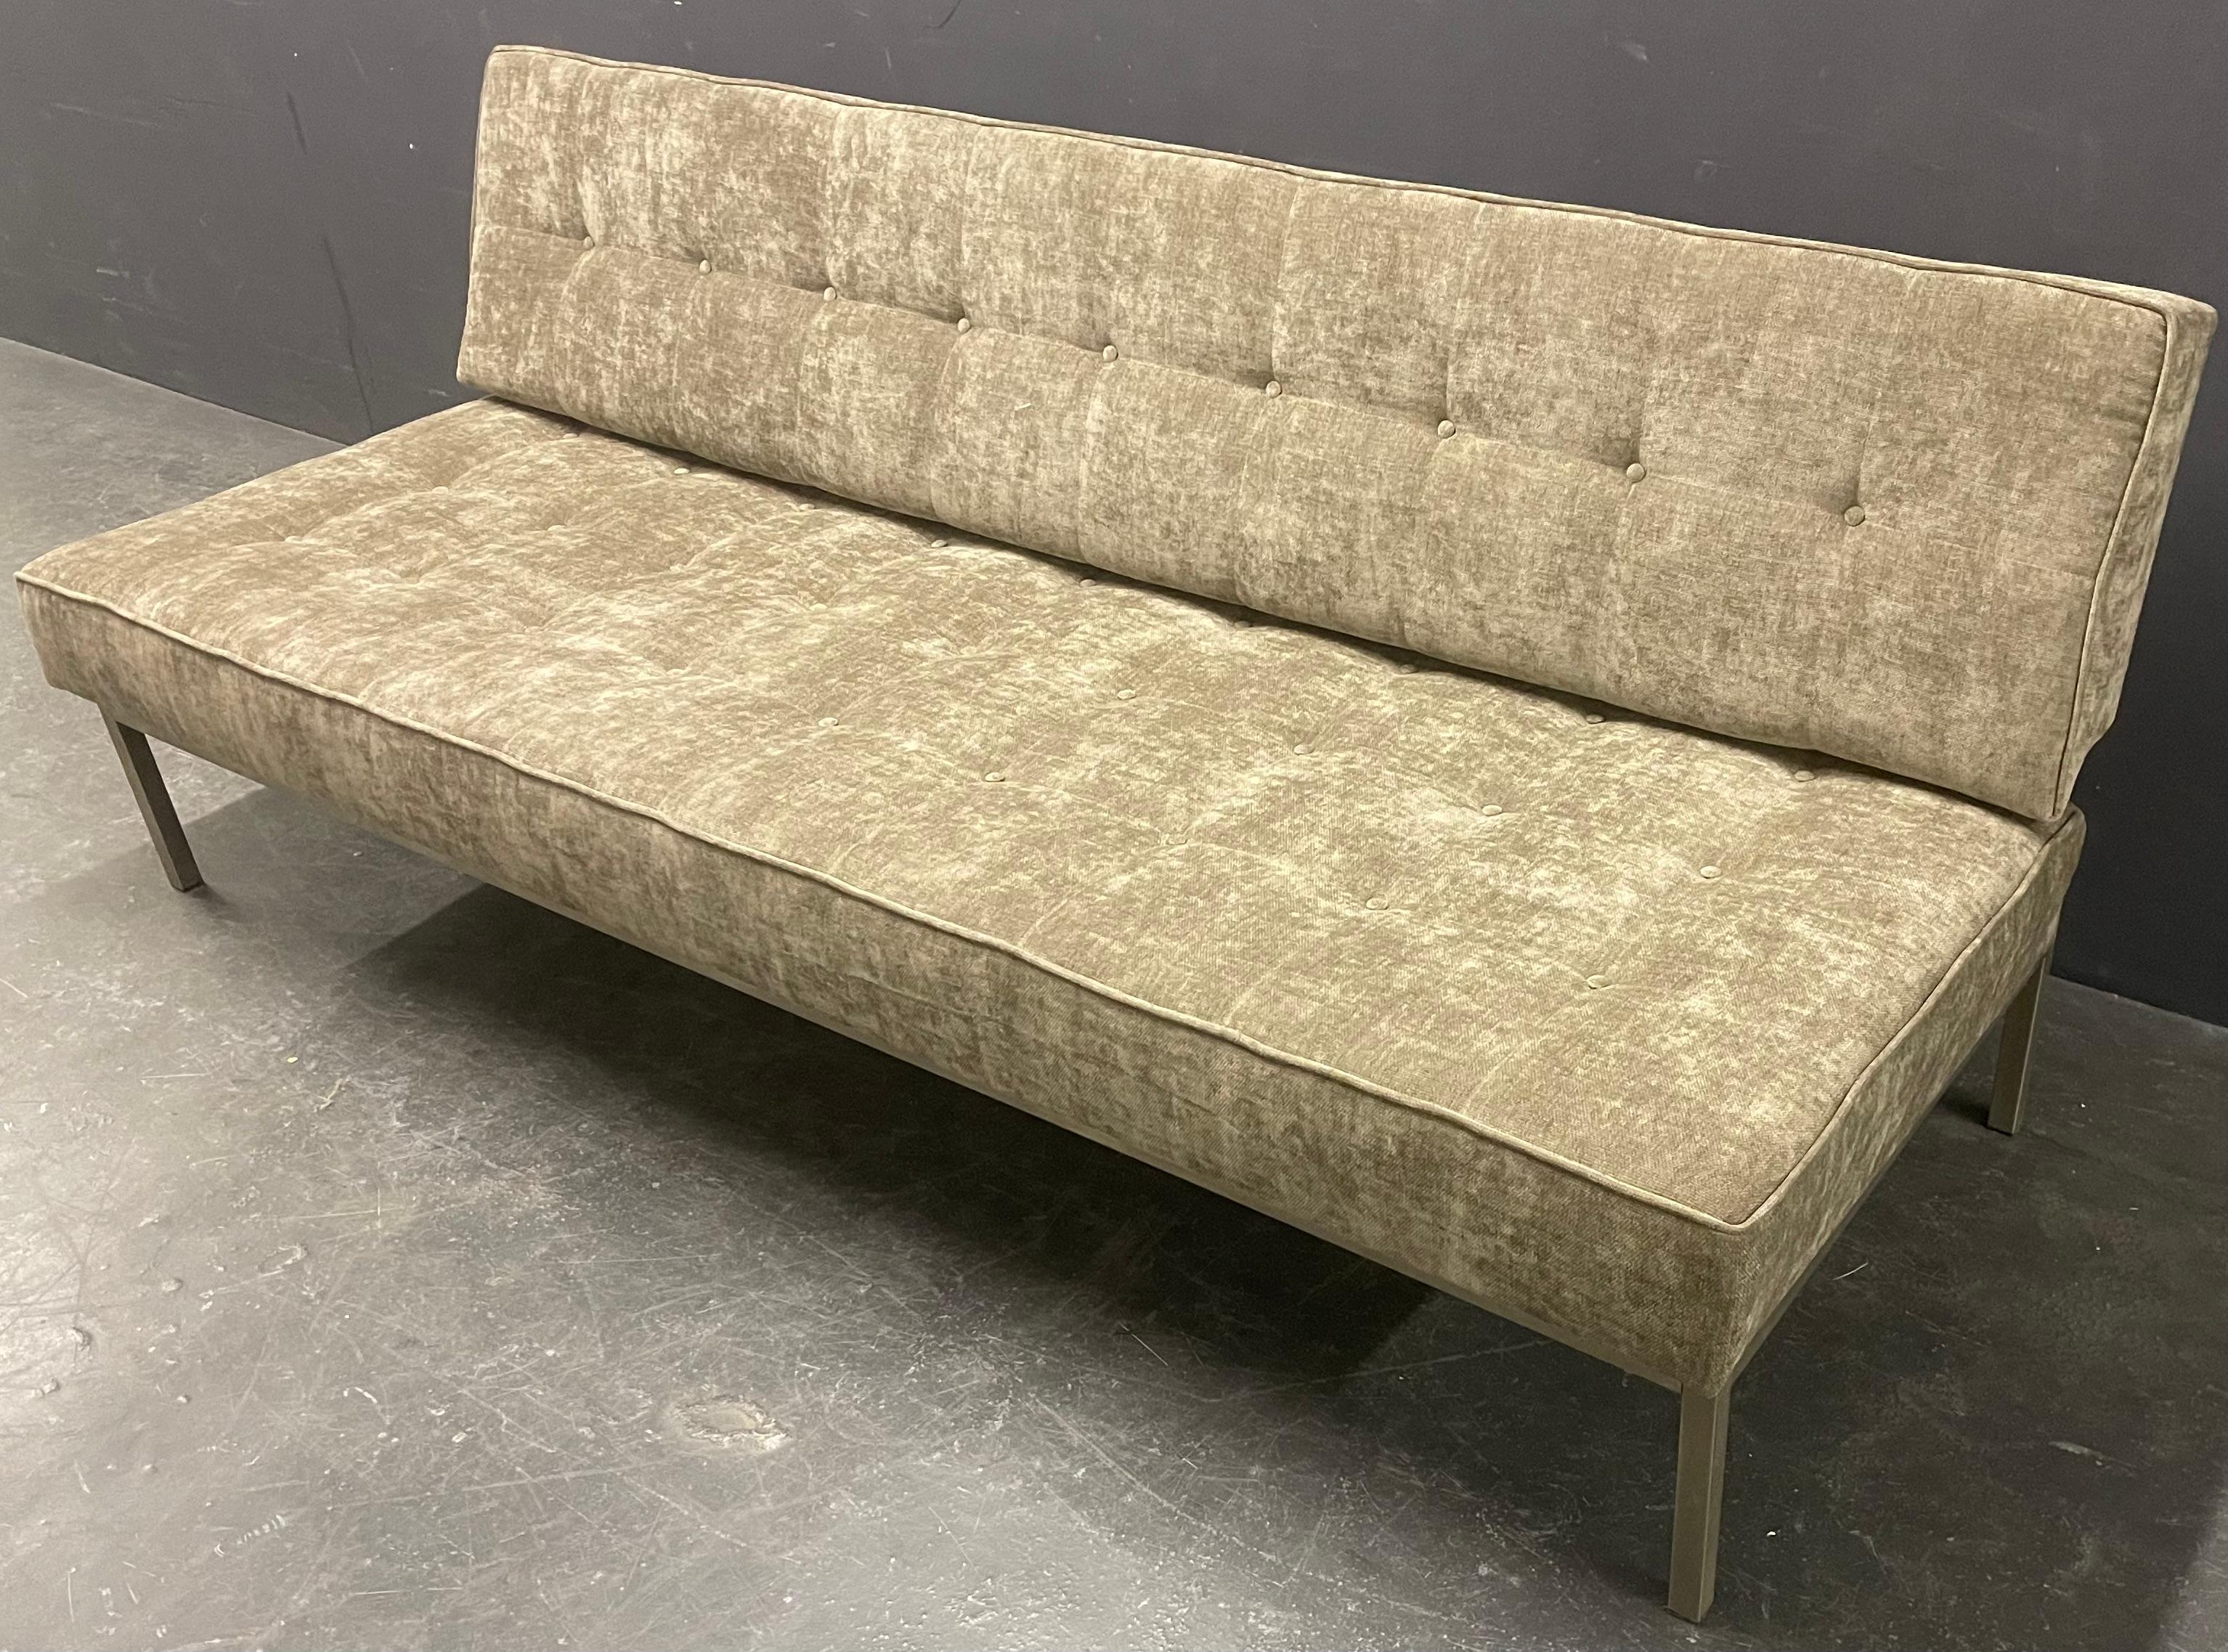 very rare version of the famous constanze daybed by johannes spalt for wittmann. Professional re-upholstered with belts, foam and very cosy fabric.